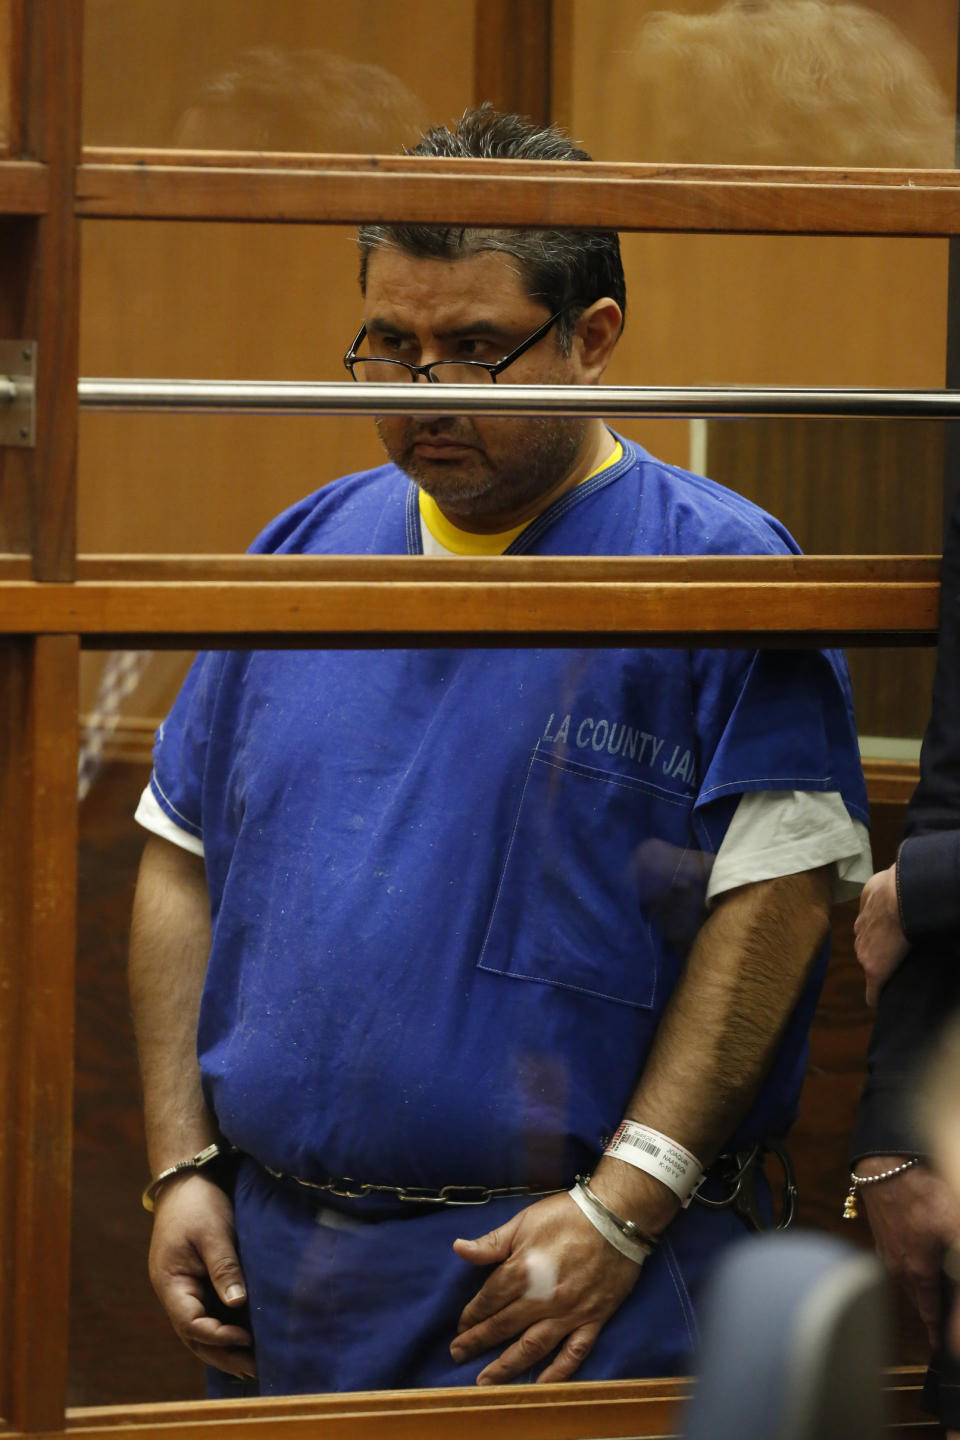 Naason Joaquin Garcia, appears in court in Los Angels, Calif. on Monday, June 10, 2019. García, and his co-defendants face a 26-count felony complaint that alleges crimes including child rape, statutory rape, molestation, human trafficking, child pornography and extortion. The charges detail allegations involving three girls and one woman between 2015 and 2018 in Los Angeles County. (Ringo Chiu/Pool Photo via AP)